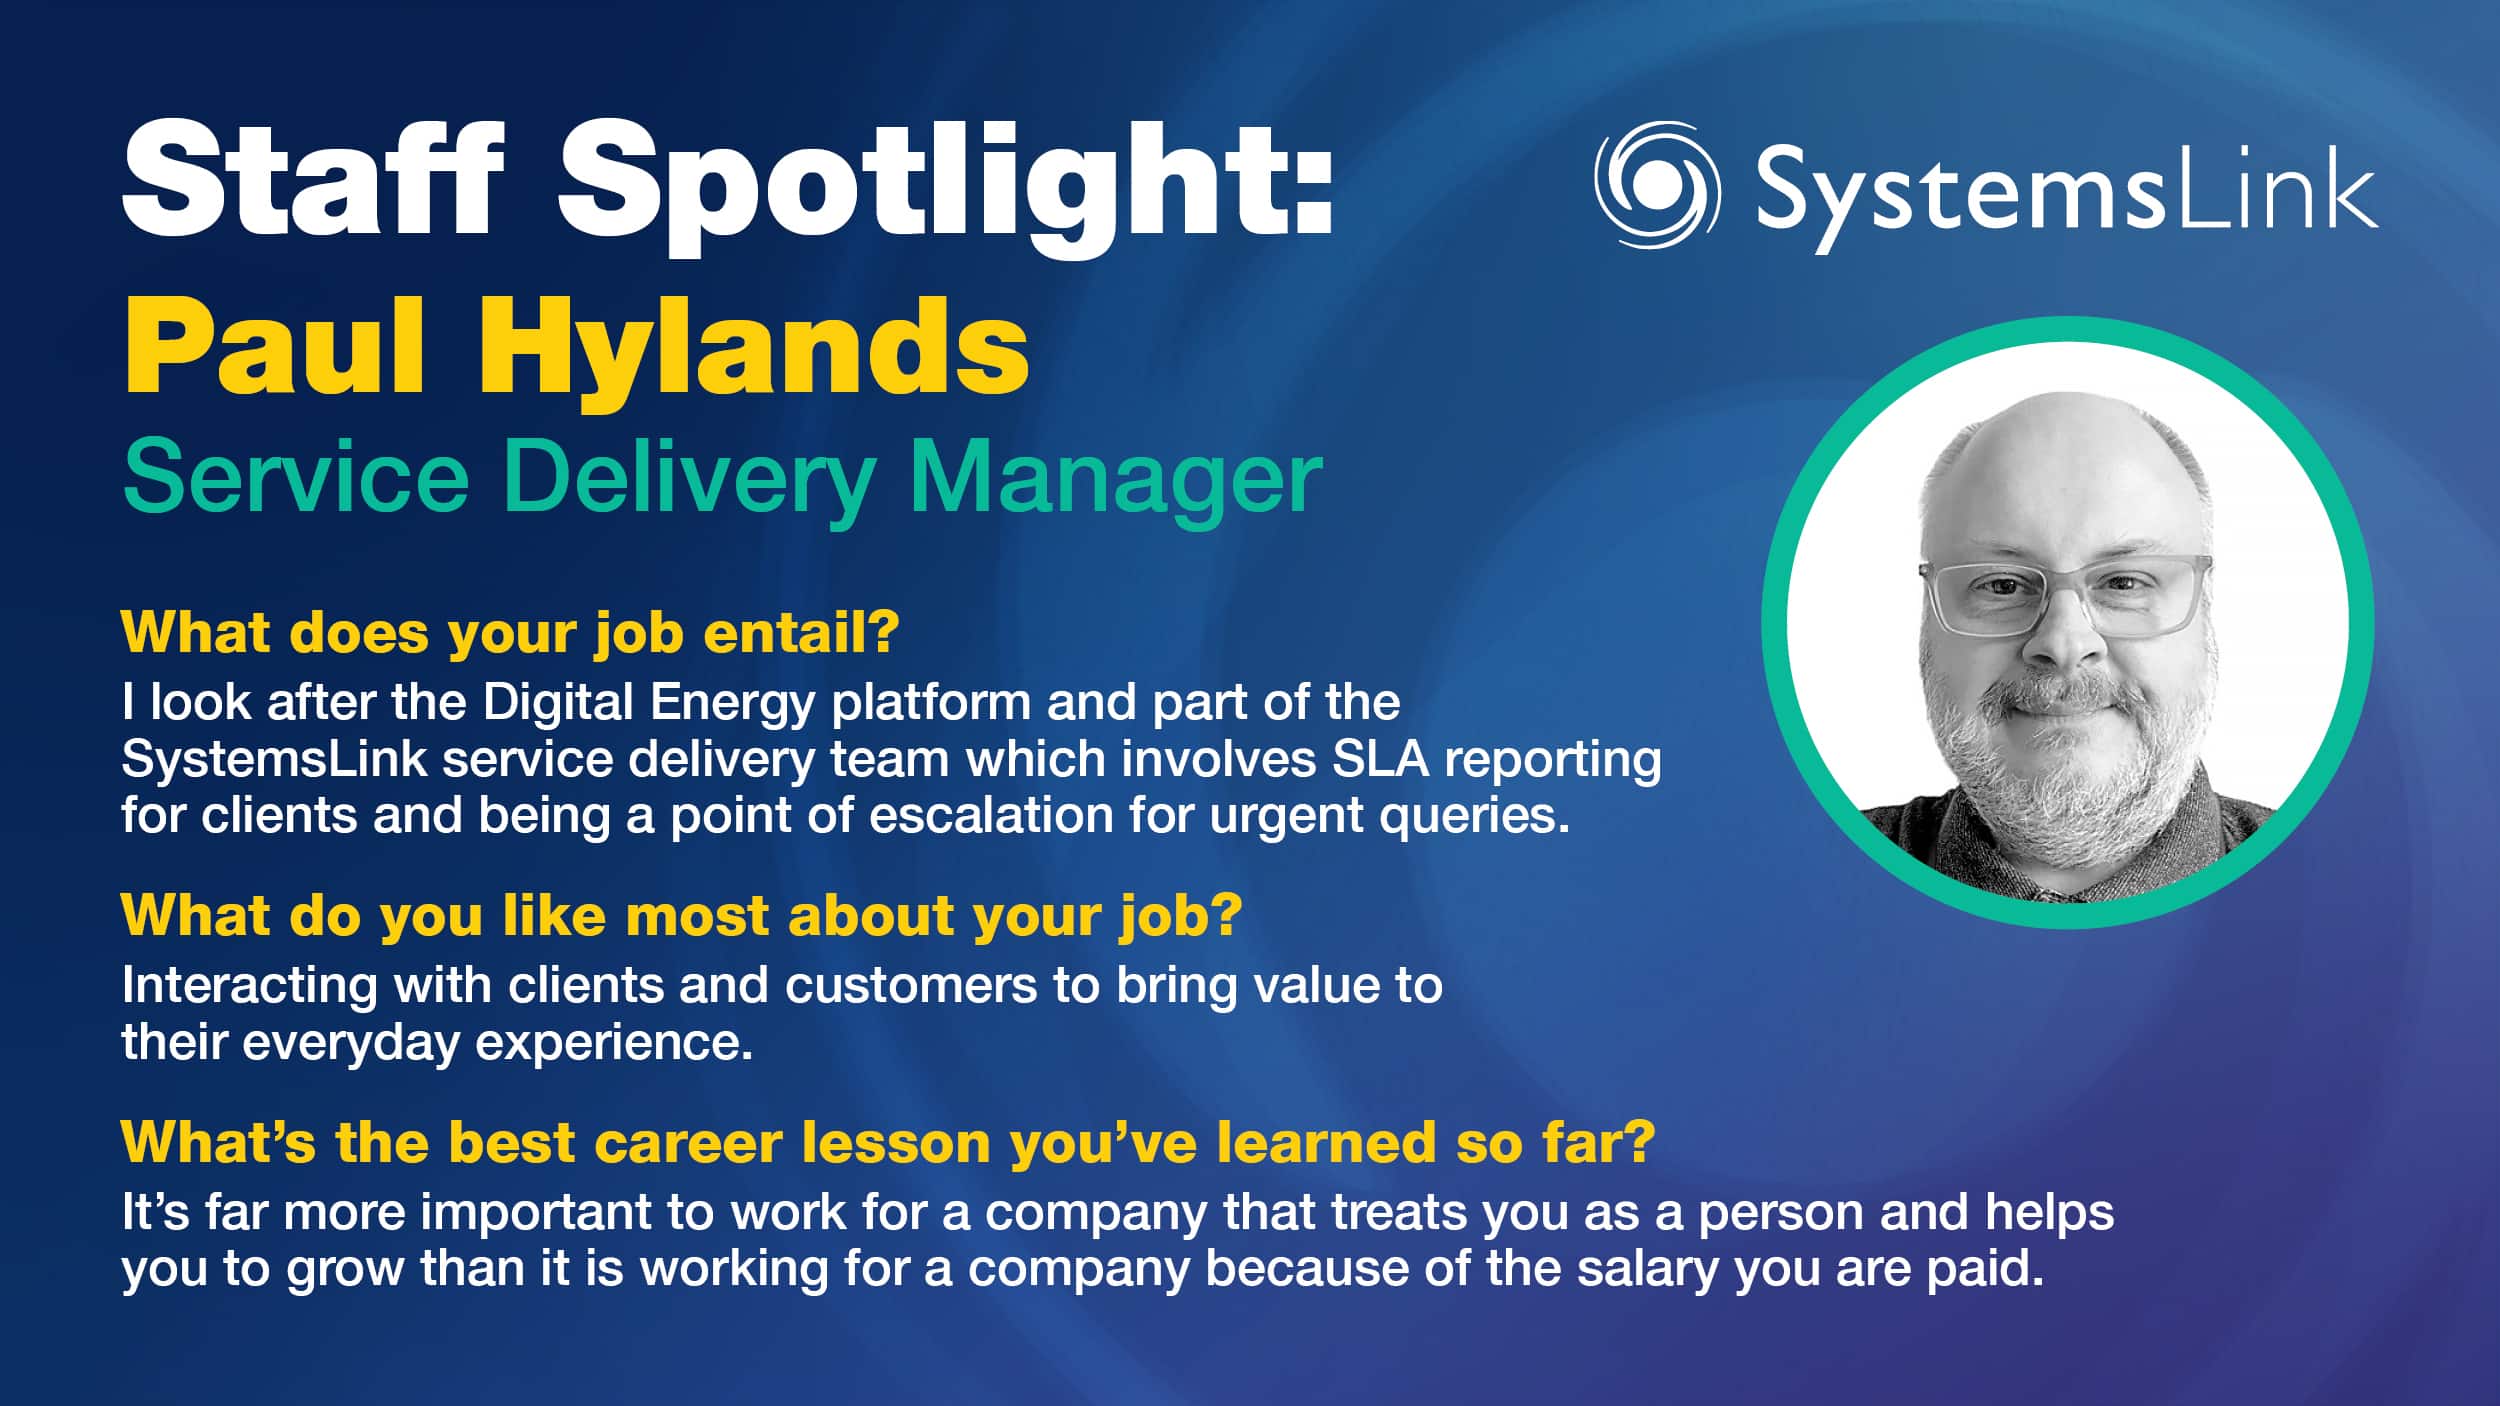 Paul Hylands - Service Delivery Manager Staff Spotlight